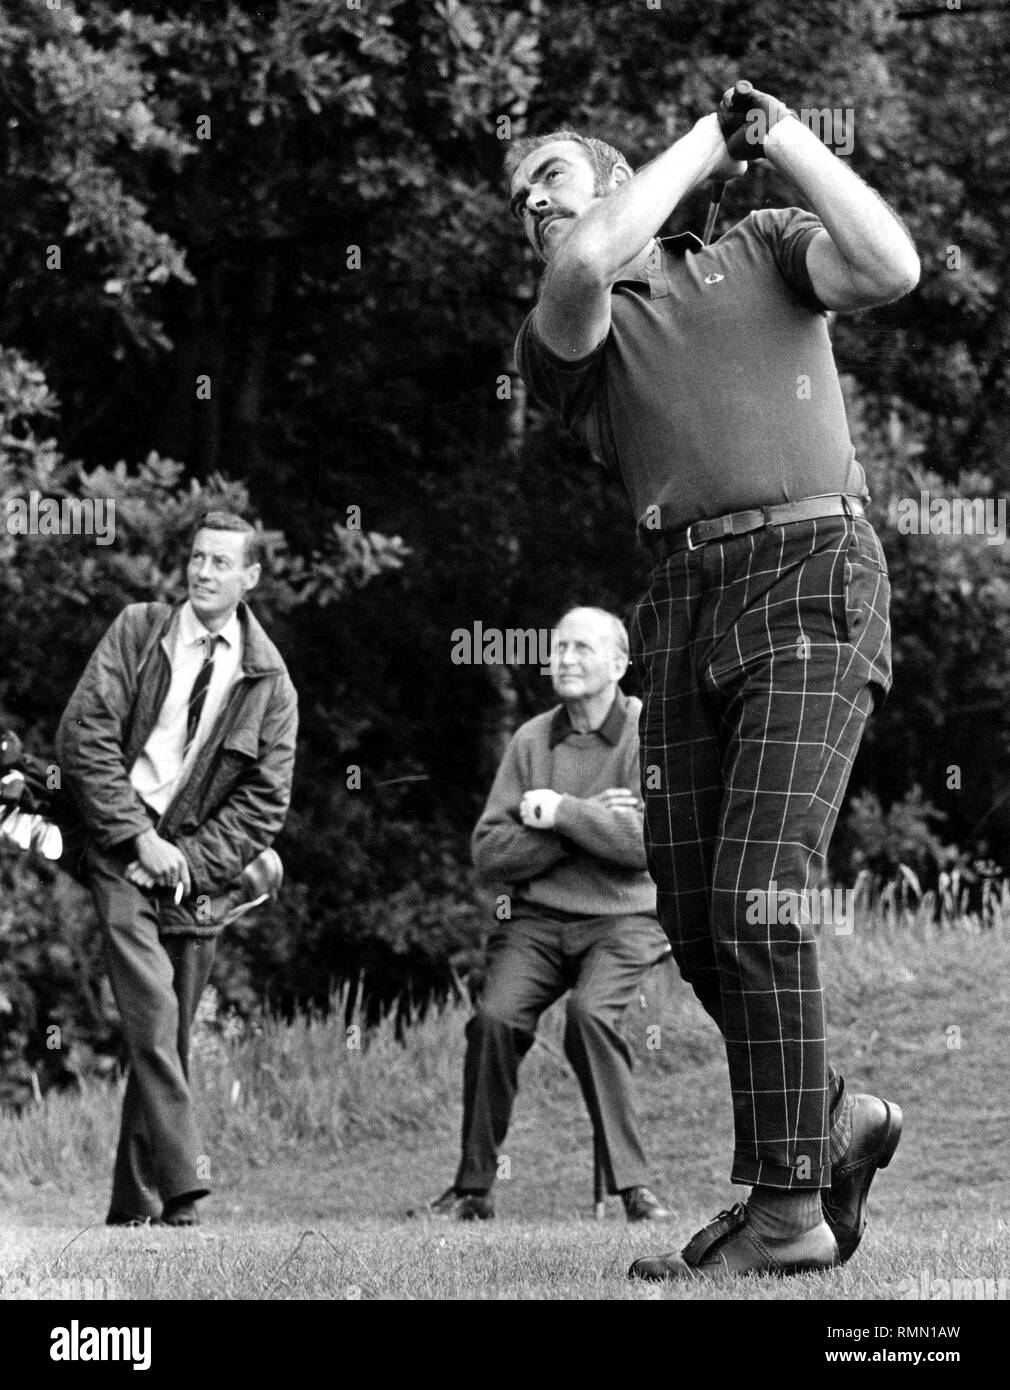 Sean Connery, playing golf in UK (1969) File Reference # 33751 266THA Stock  Photo - Alamy